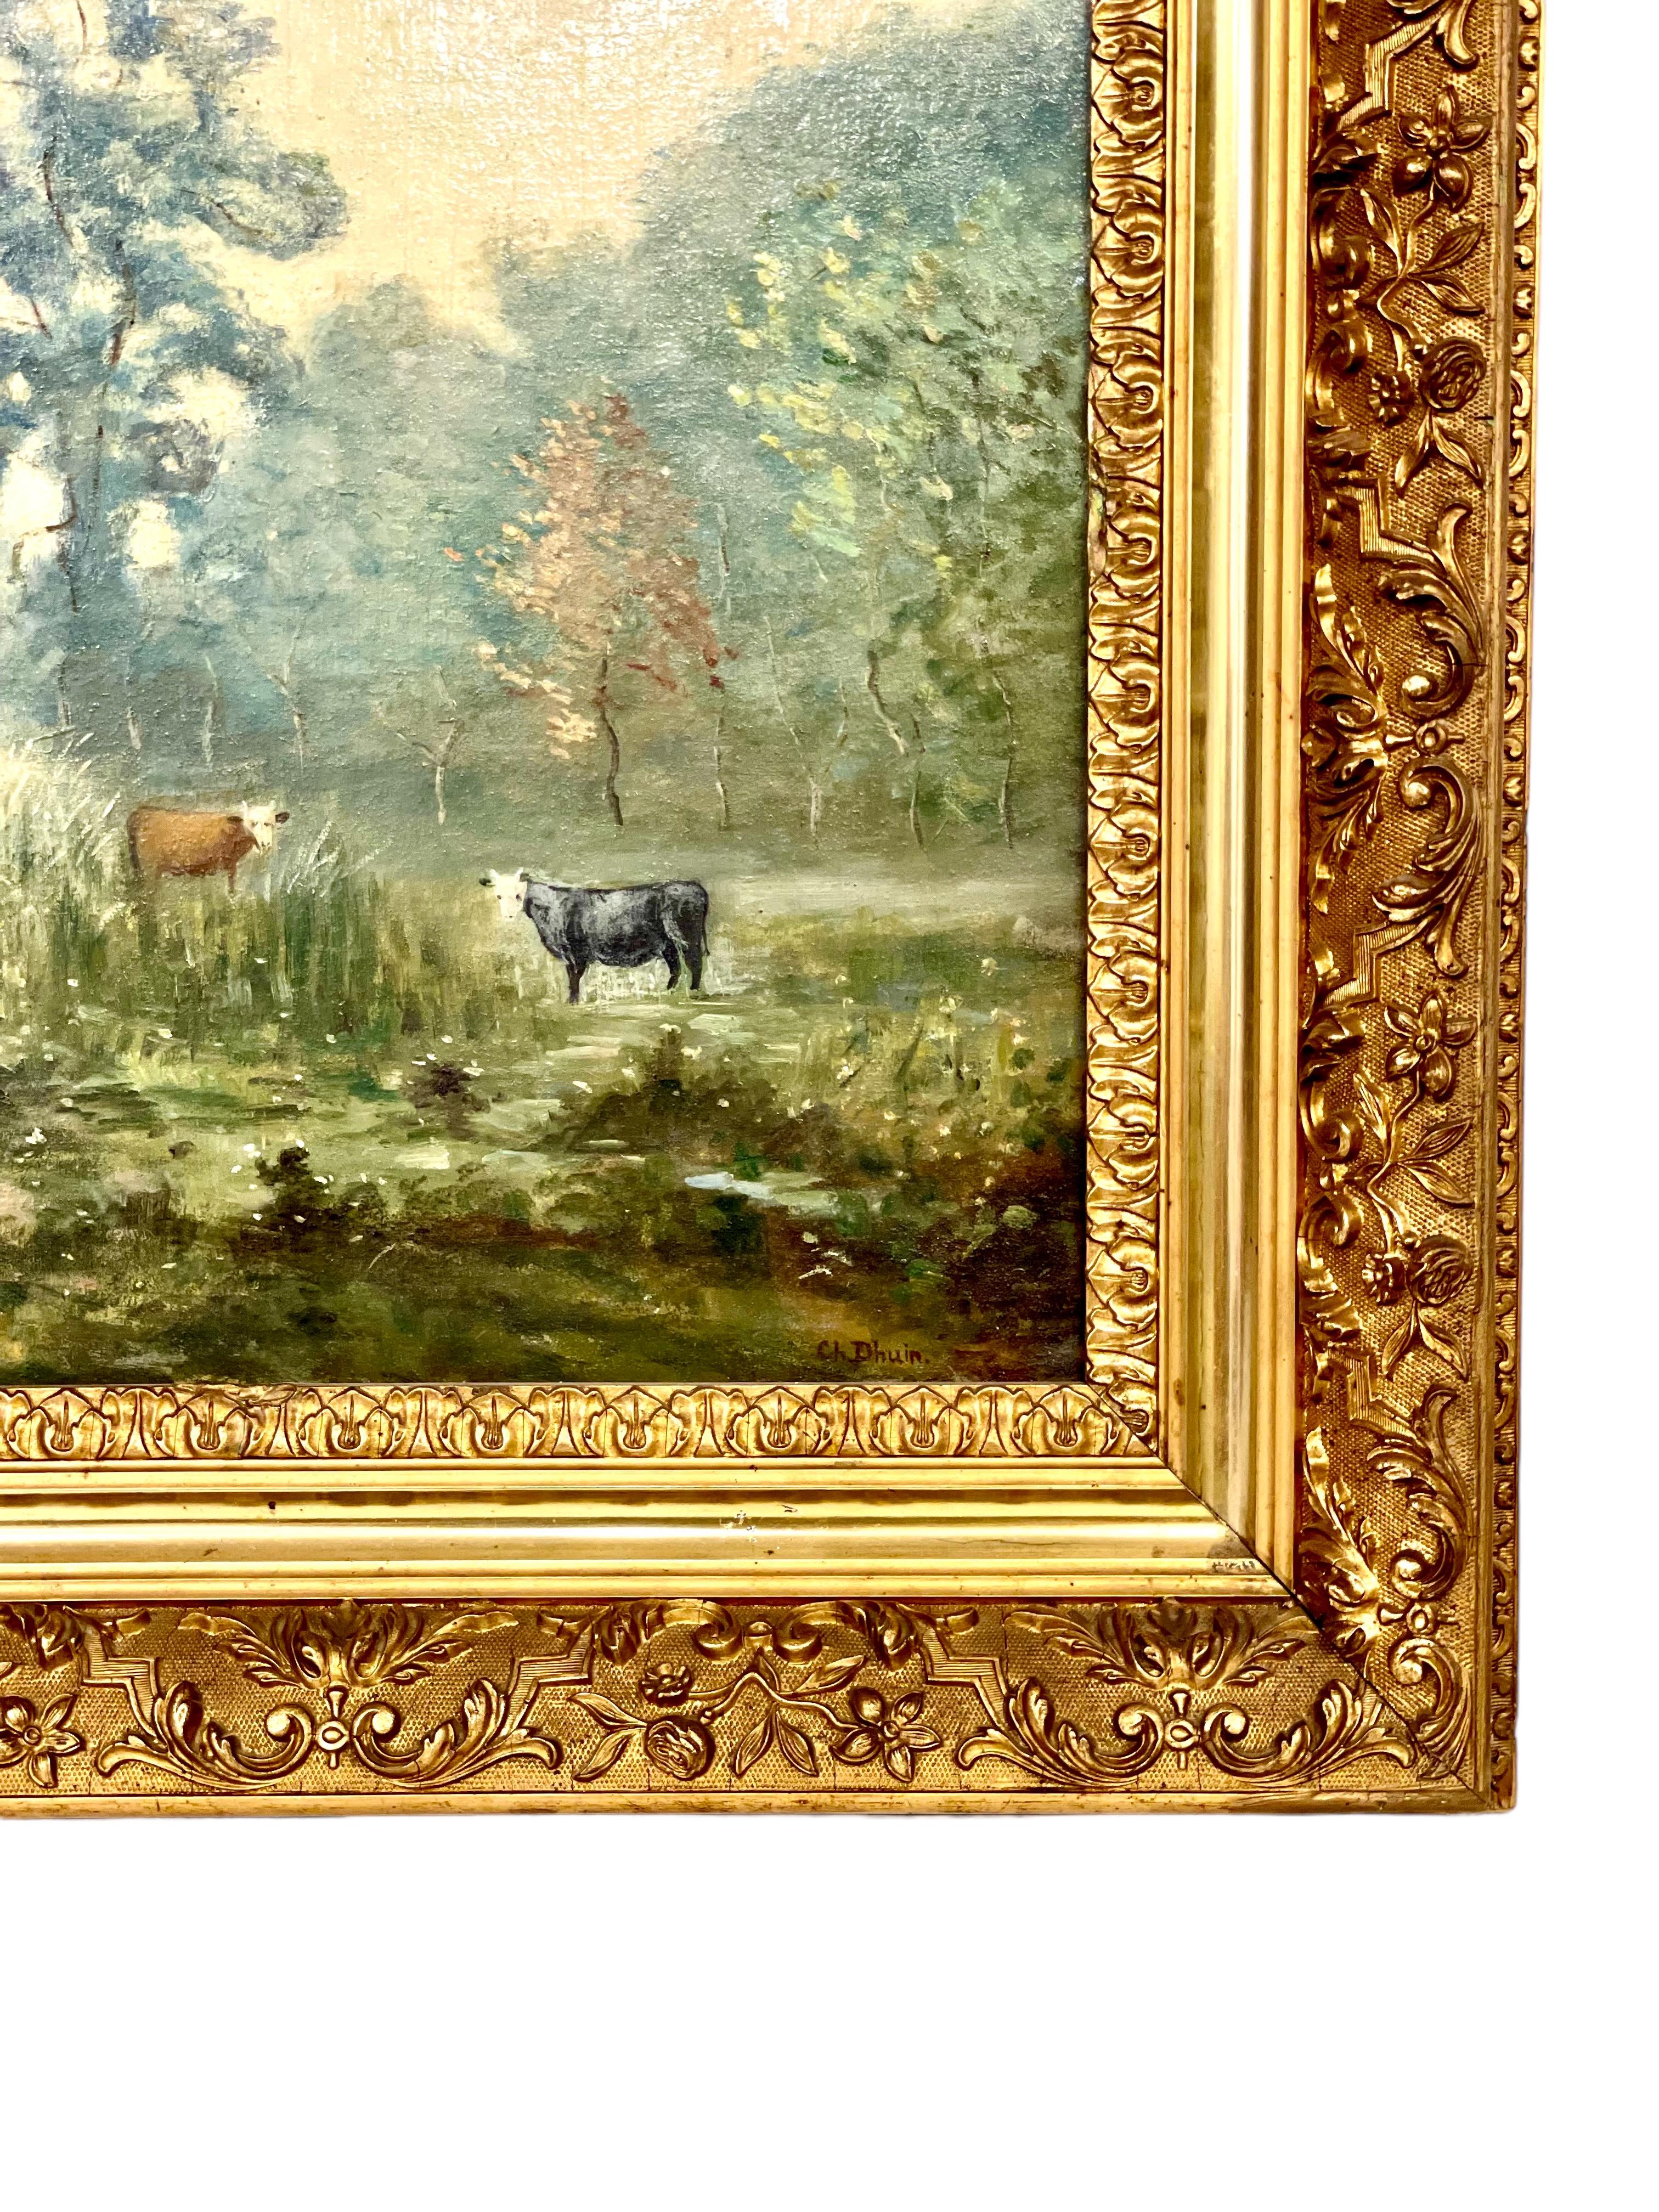 French Provincial Large Oil on Panel 'The Cowherder by the Pond', by Charles Dhuin For Sale